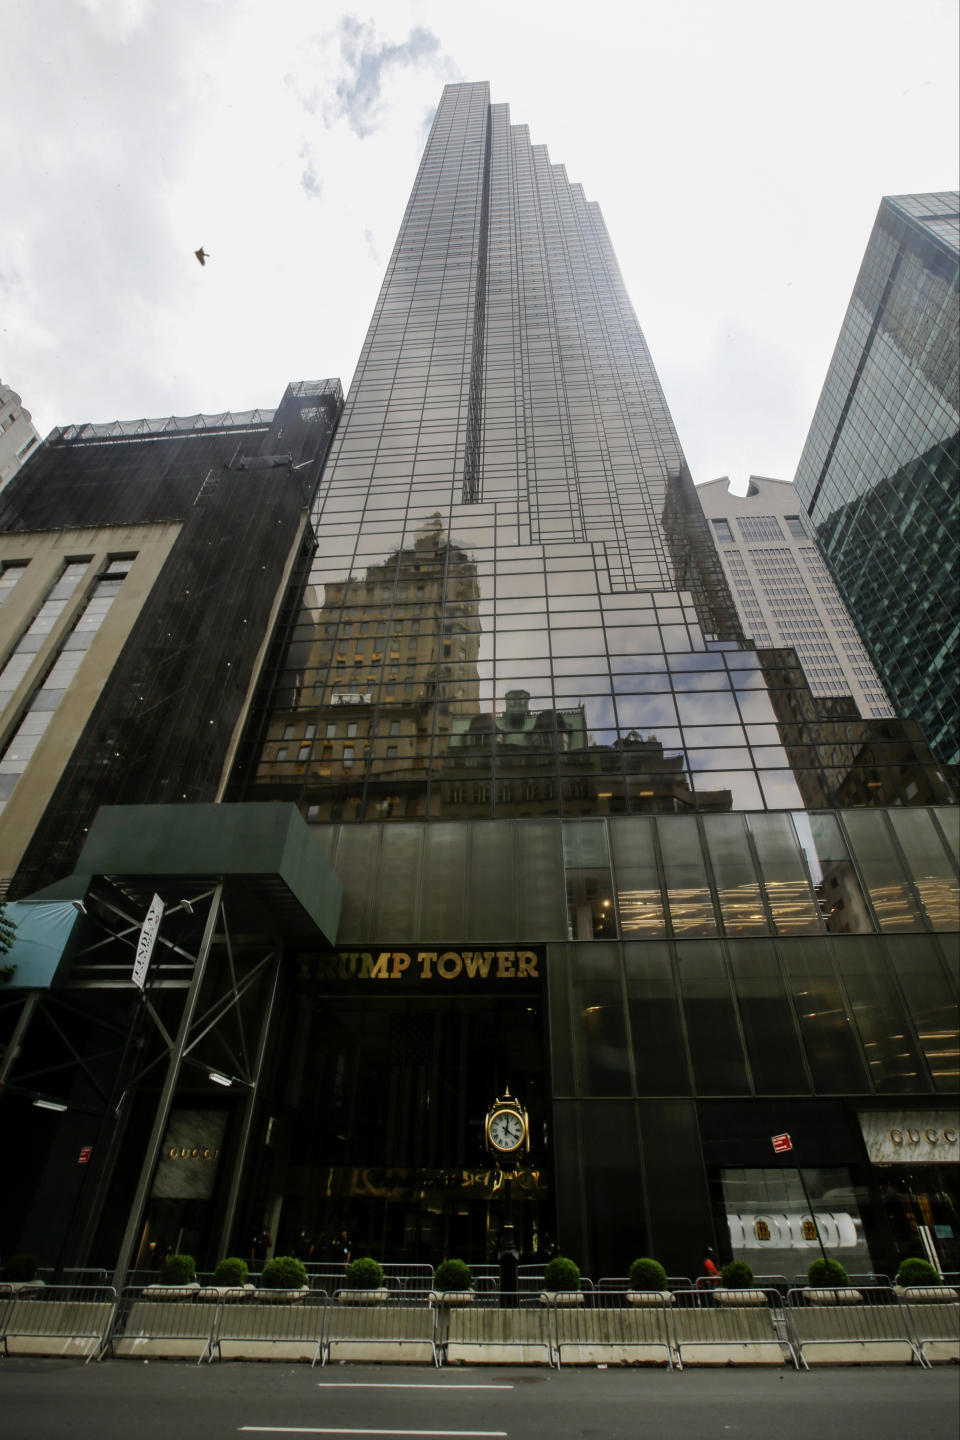 FILE - In this Tuesday, July 7, 2020 file photo, pedestrians walk past the Trump Tower building in New York. Trump’s true financial picture has gotten renewed scrutiny in the wake of a New York Times report in September 2020 that he declared hundreds of millions in losses in recent years, allowing him to pay just $750 in taxes the year he won the presidency, and nothing for 10 of 15 years before that. (AP Photo/Frank Franklin II, File)